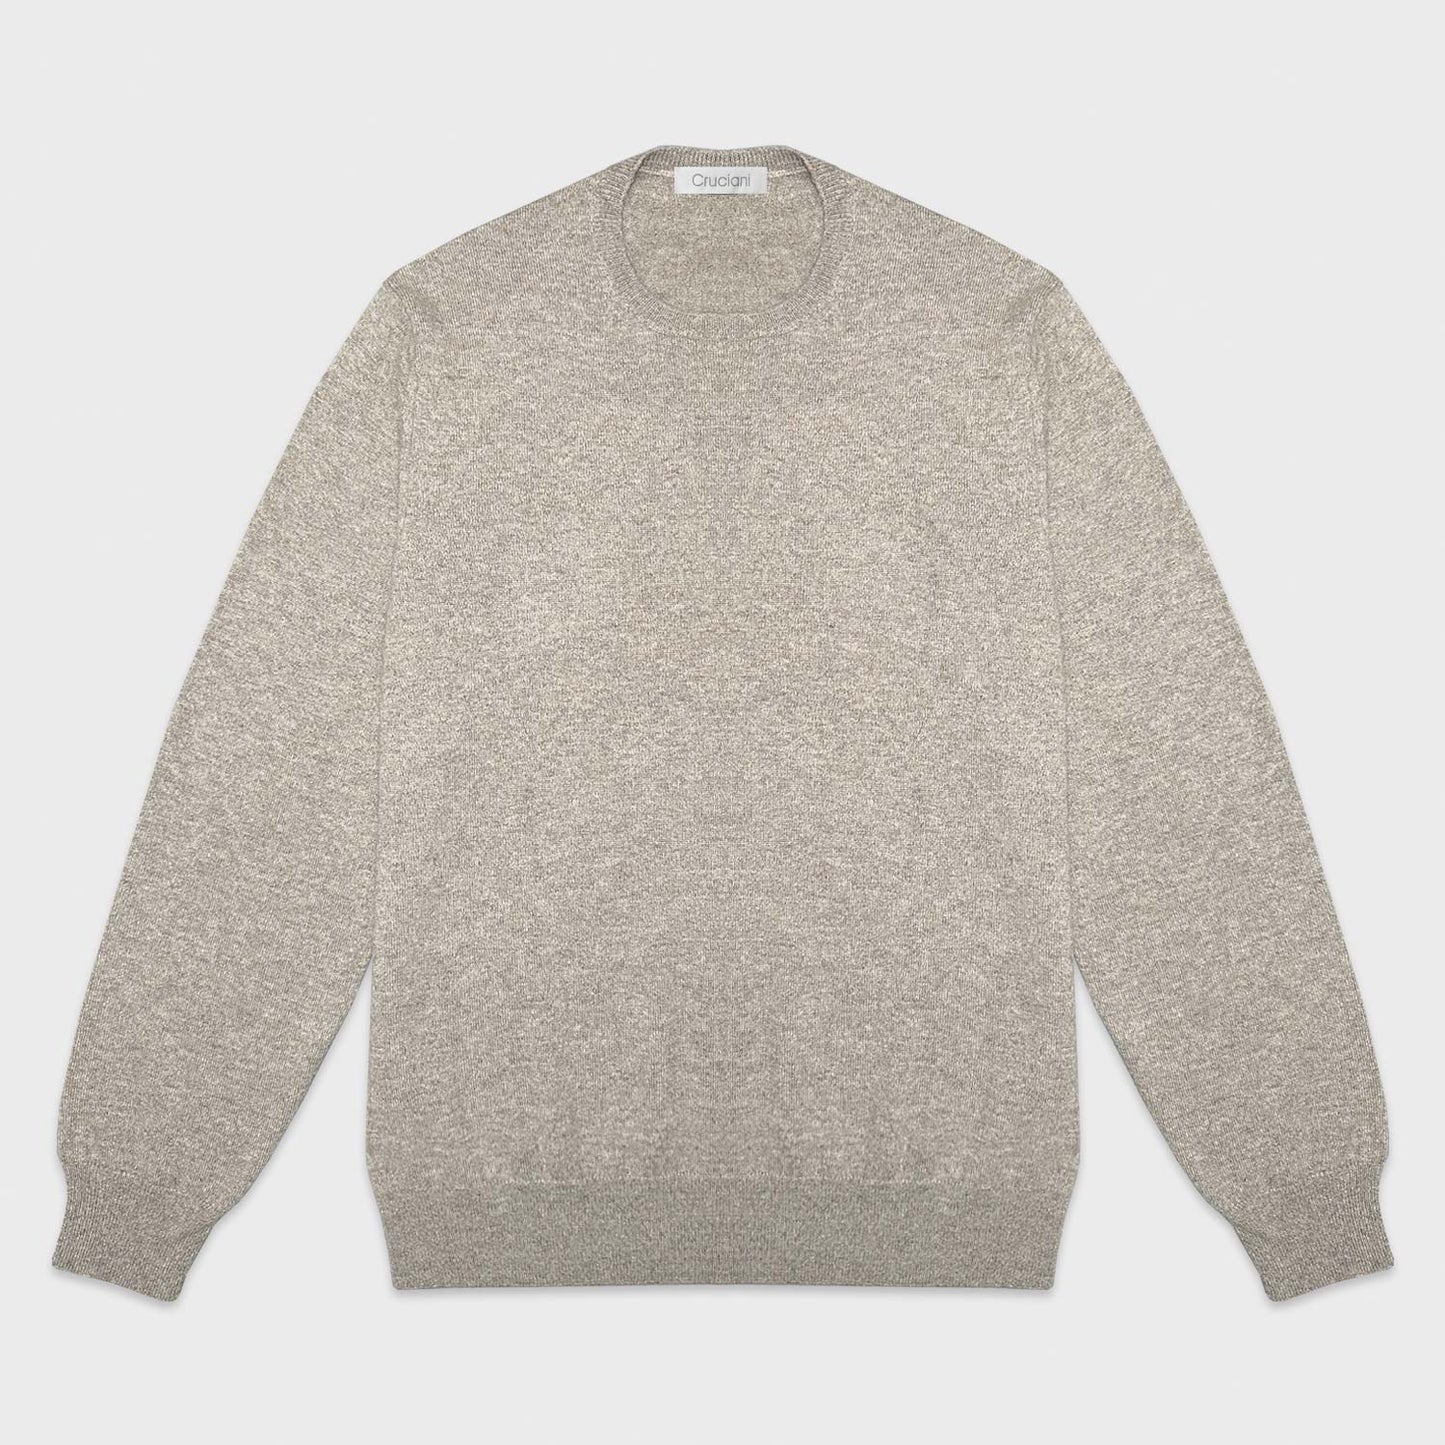 Melange Sand Brown Cashmere Sweater Crewneck Cruciani. Melange sand brown cashmere crewneck, made in Italy by Cruciani, regular fit, warm and soft, light and smooth to the touch. A timeless sweater ideal for a classic or sporty outfit.